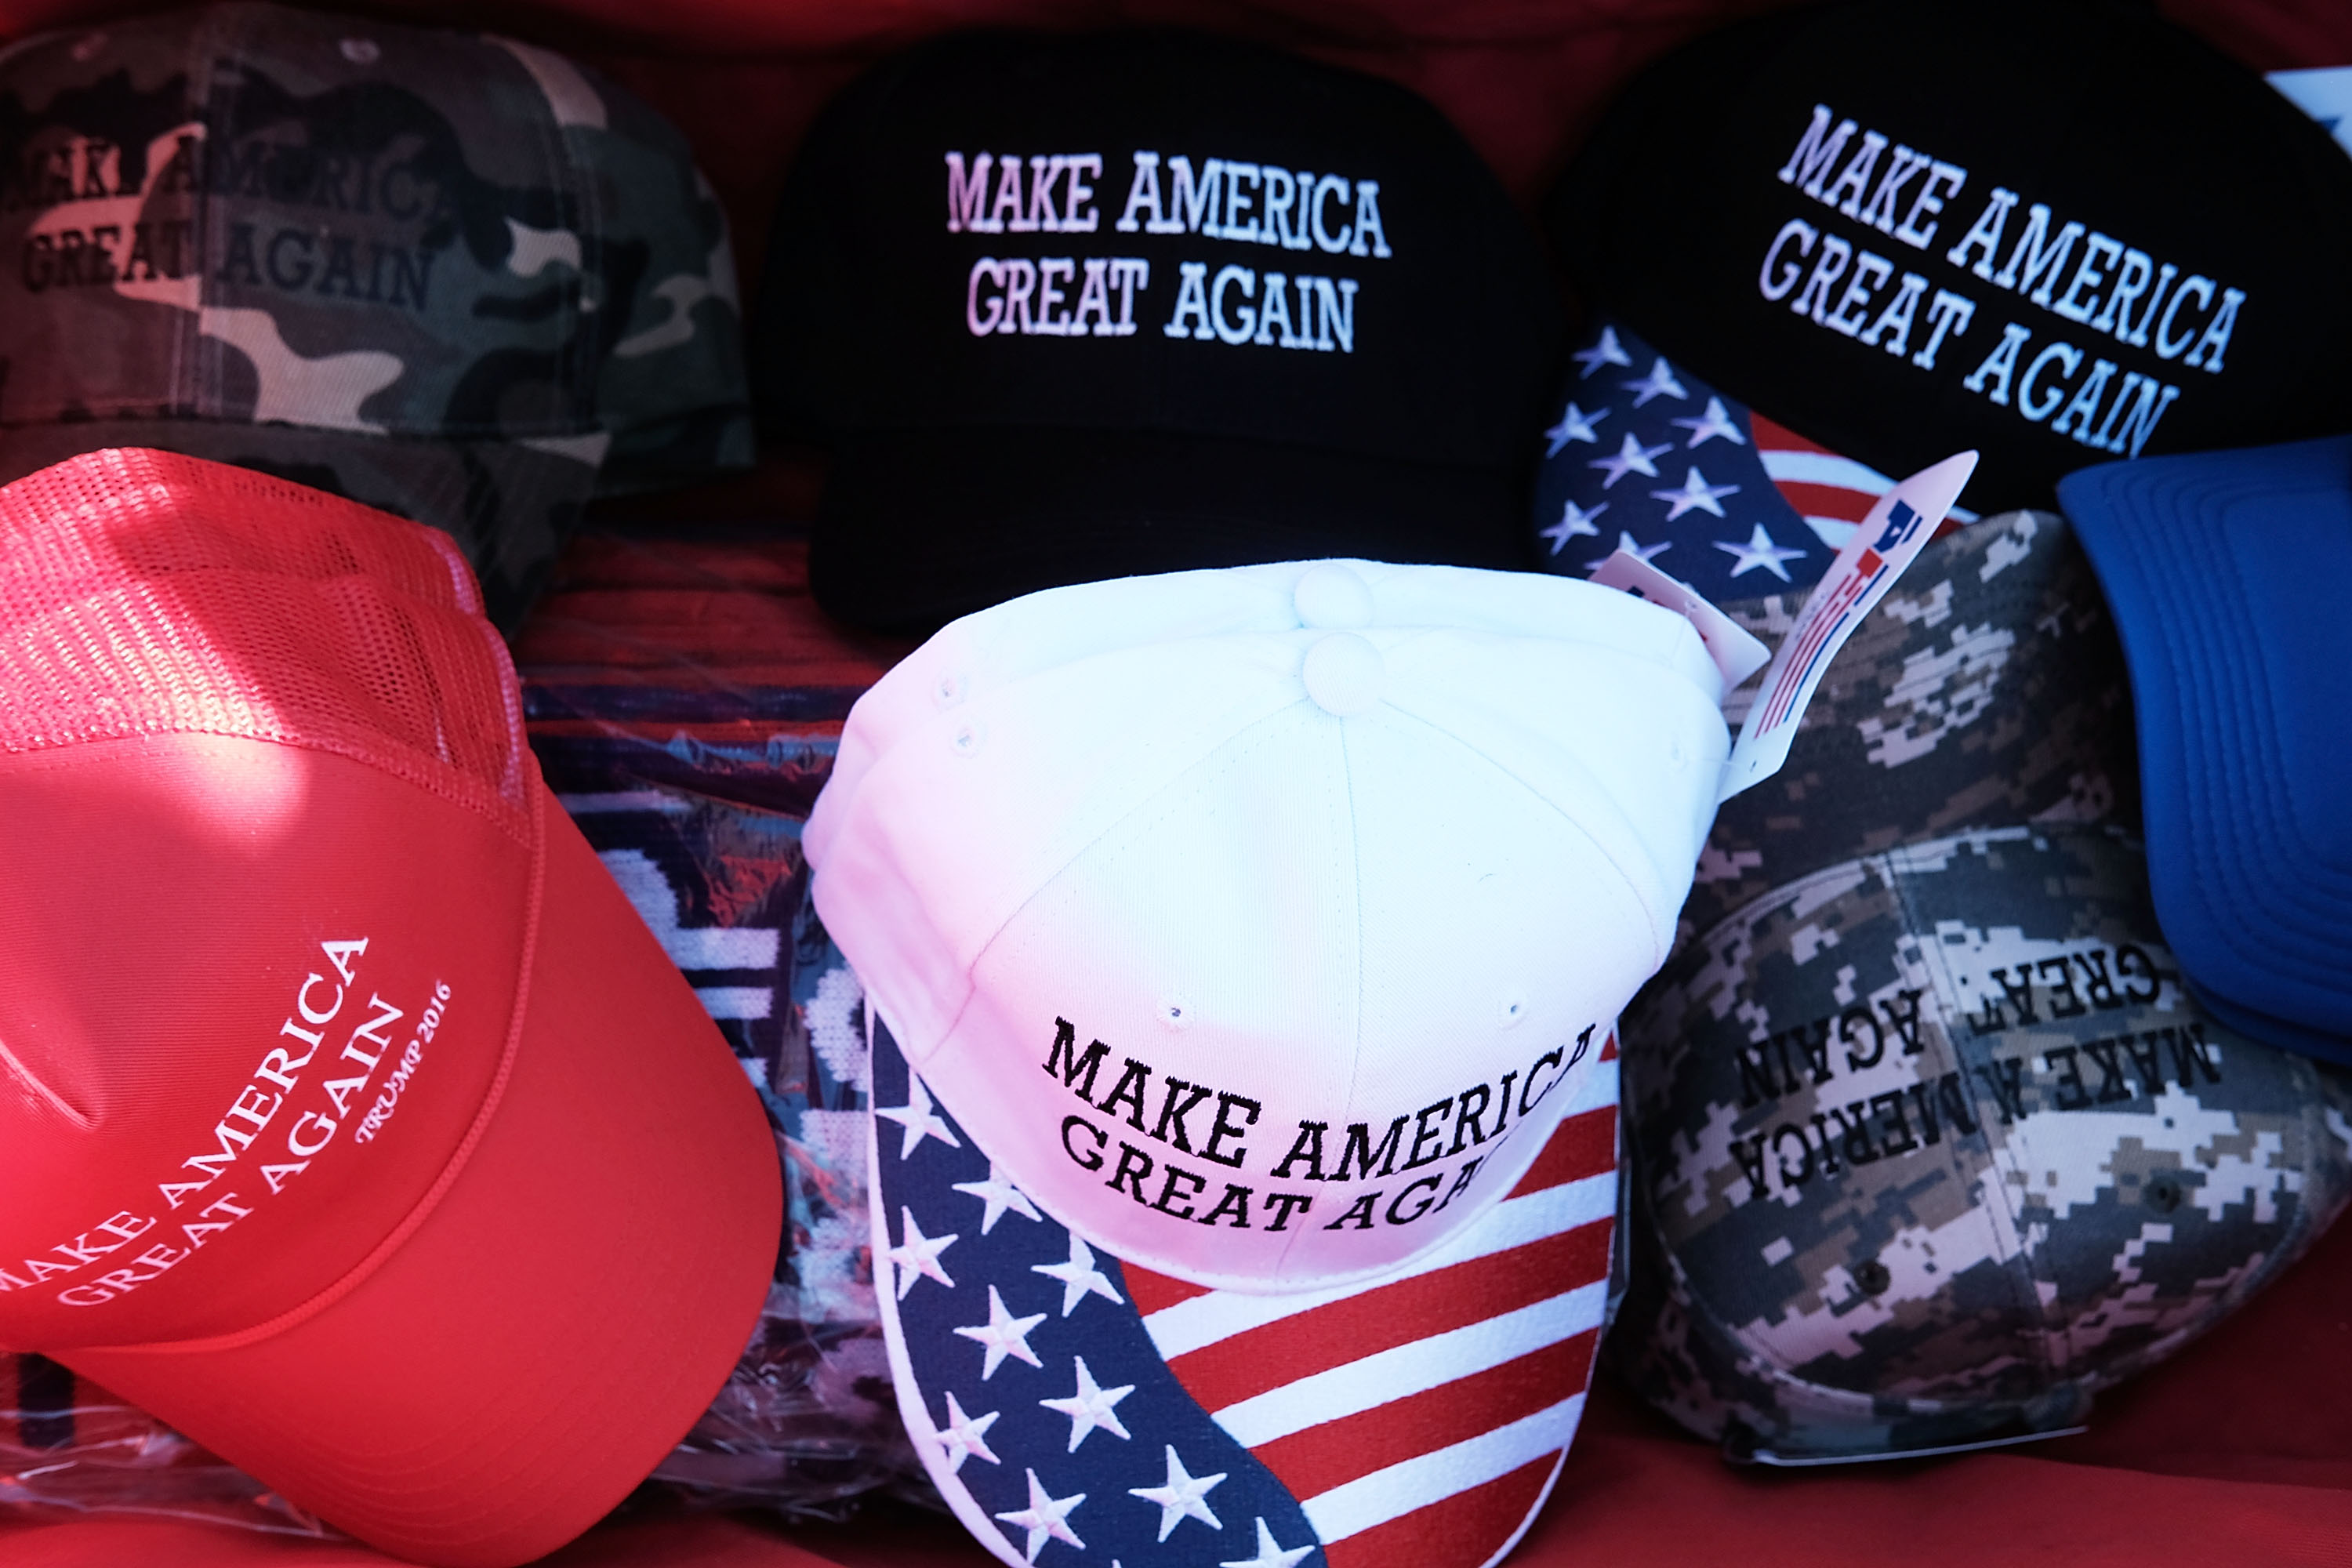 (FILES) This file photo taken on November 3, 2016 shows Donald Trump "Make America Great Again" hats sold at a rally  in Hershey, Pennsylvania.  The Canadian authorities have suspended a judge for wearing a cap with Donald Trump's campaign slogan "Make America Great Again" in court after November's US presidential election, local media reported on January 6, 2017. Ontario Court Judge Bernd Zabel "stopped being assigned to preside in court December 21, 2016," court spokeswoman Kate Andrew told the local daily The Hamilton Spectator without commenting about his future.  / AFP PHOTO / GETTY IMAGES NORTH AMERICA / SPENCER PLATT